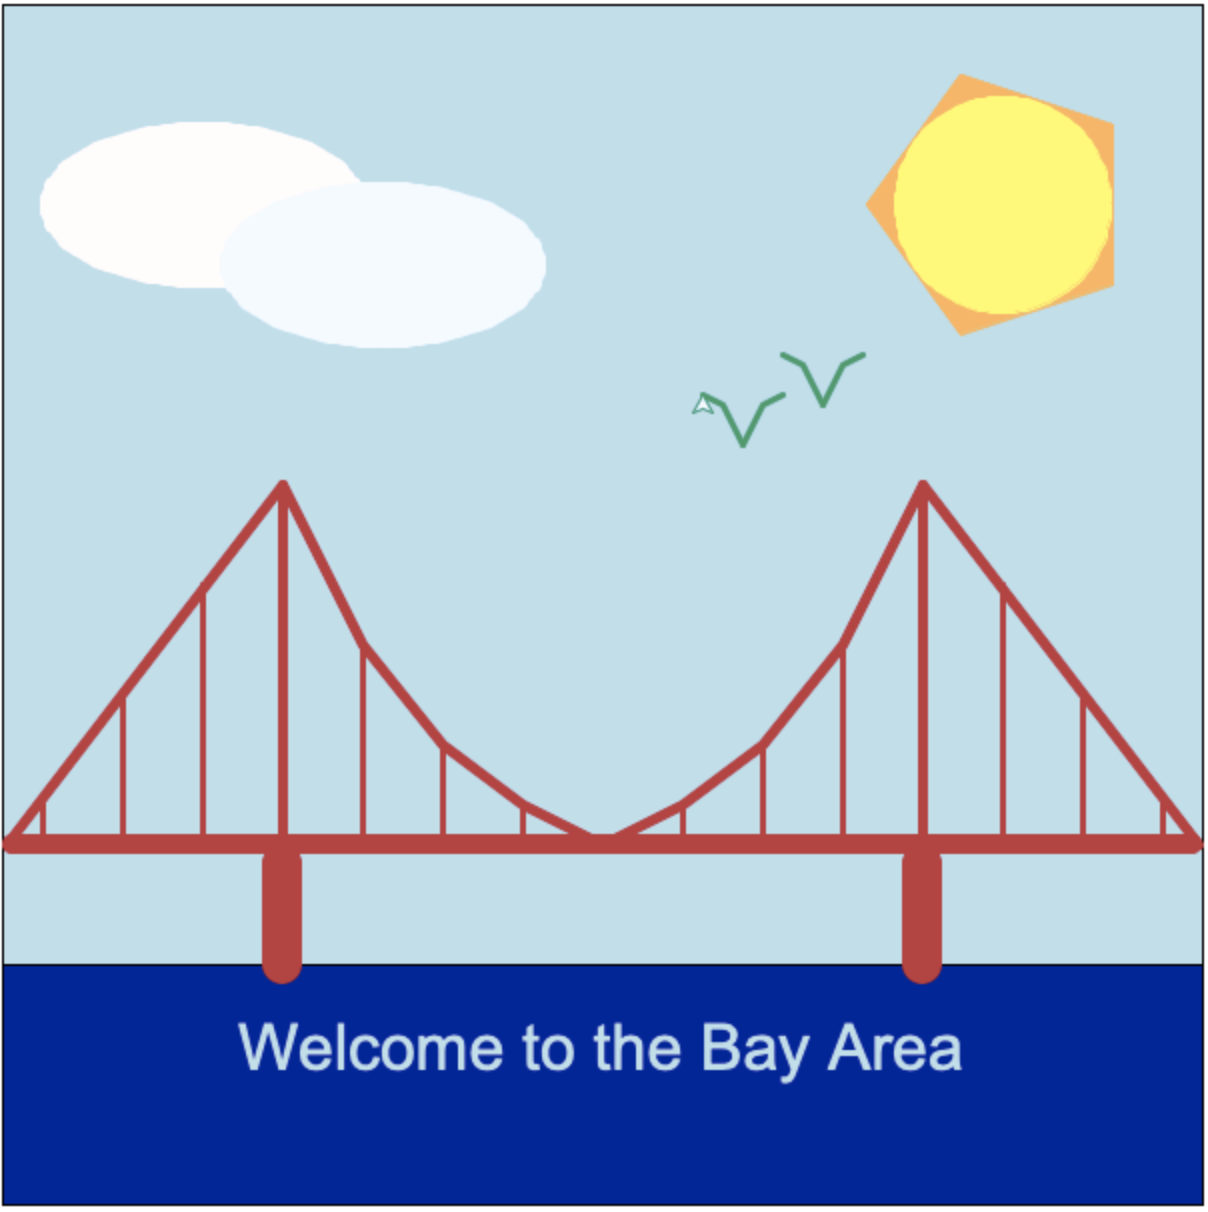 An image of the Golden Gate Bridge labeled 'Welcome to the Bay Area' by Claire Moreland & Danika Heaney